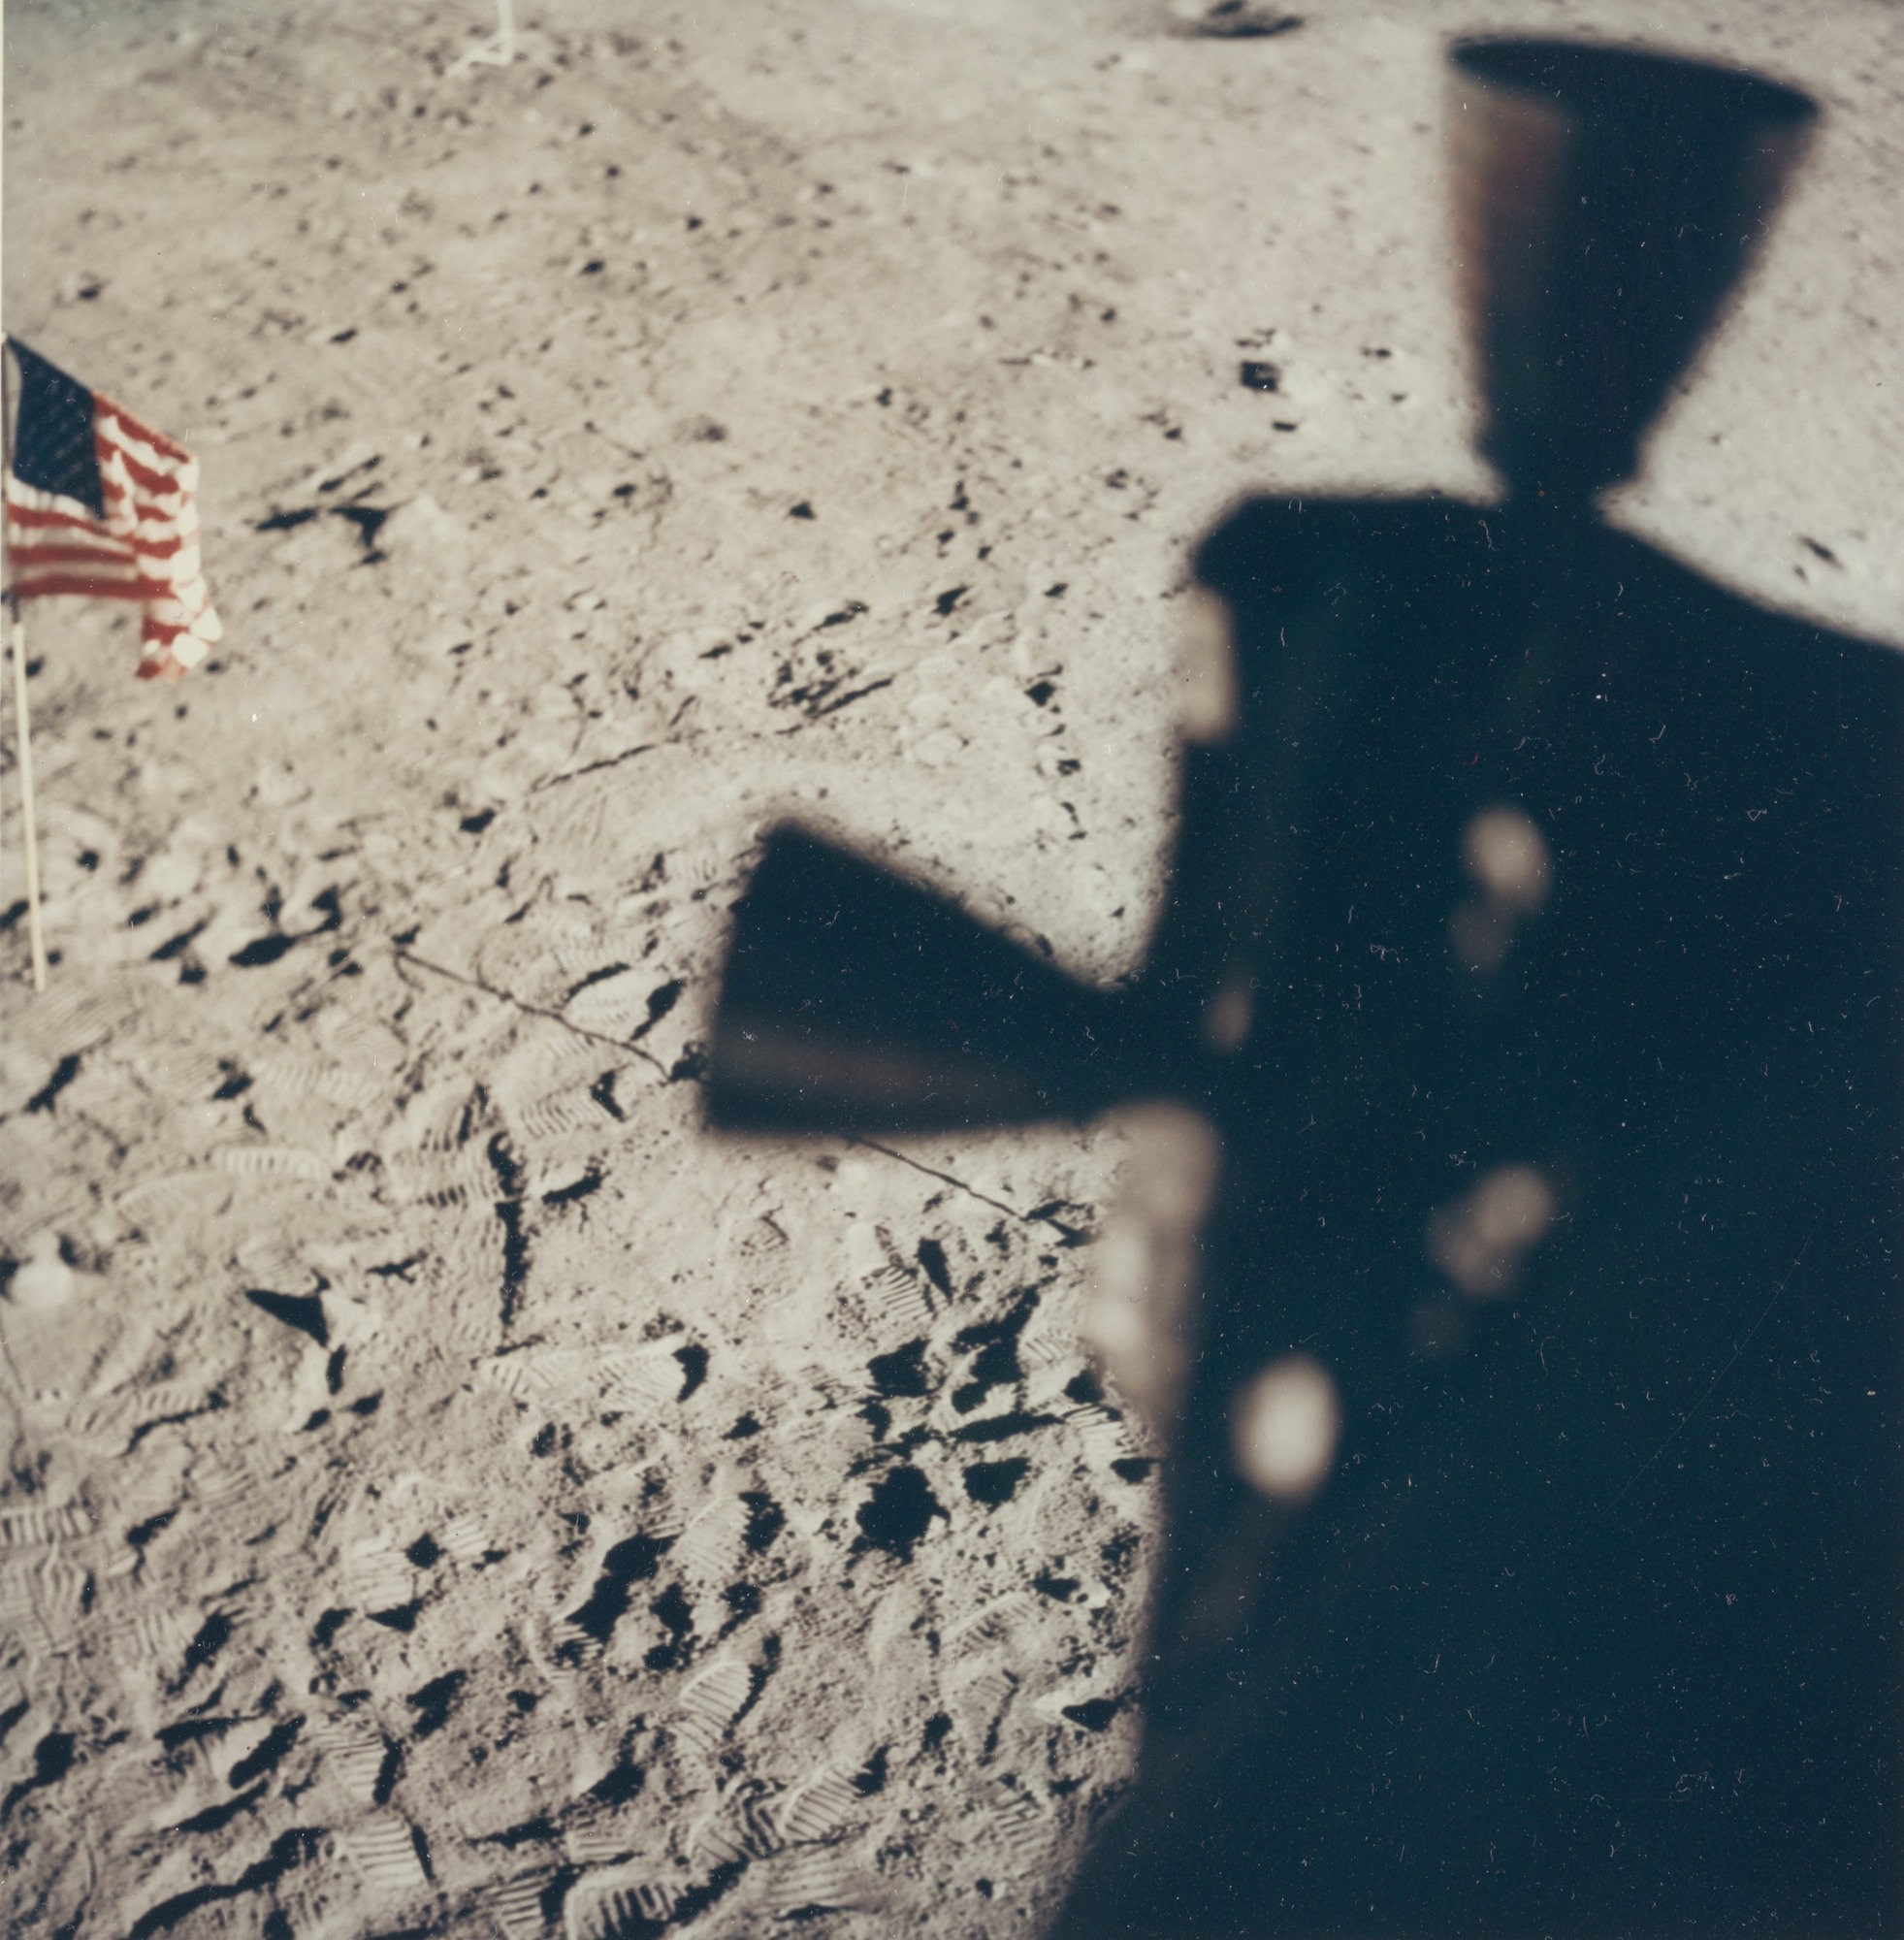 Untitled photograph from the Apollo 11 mission